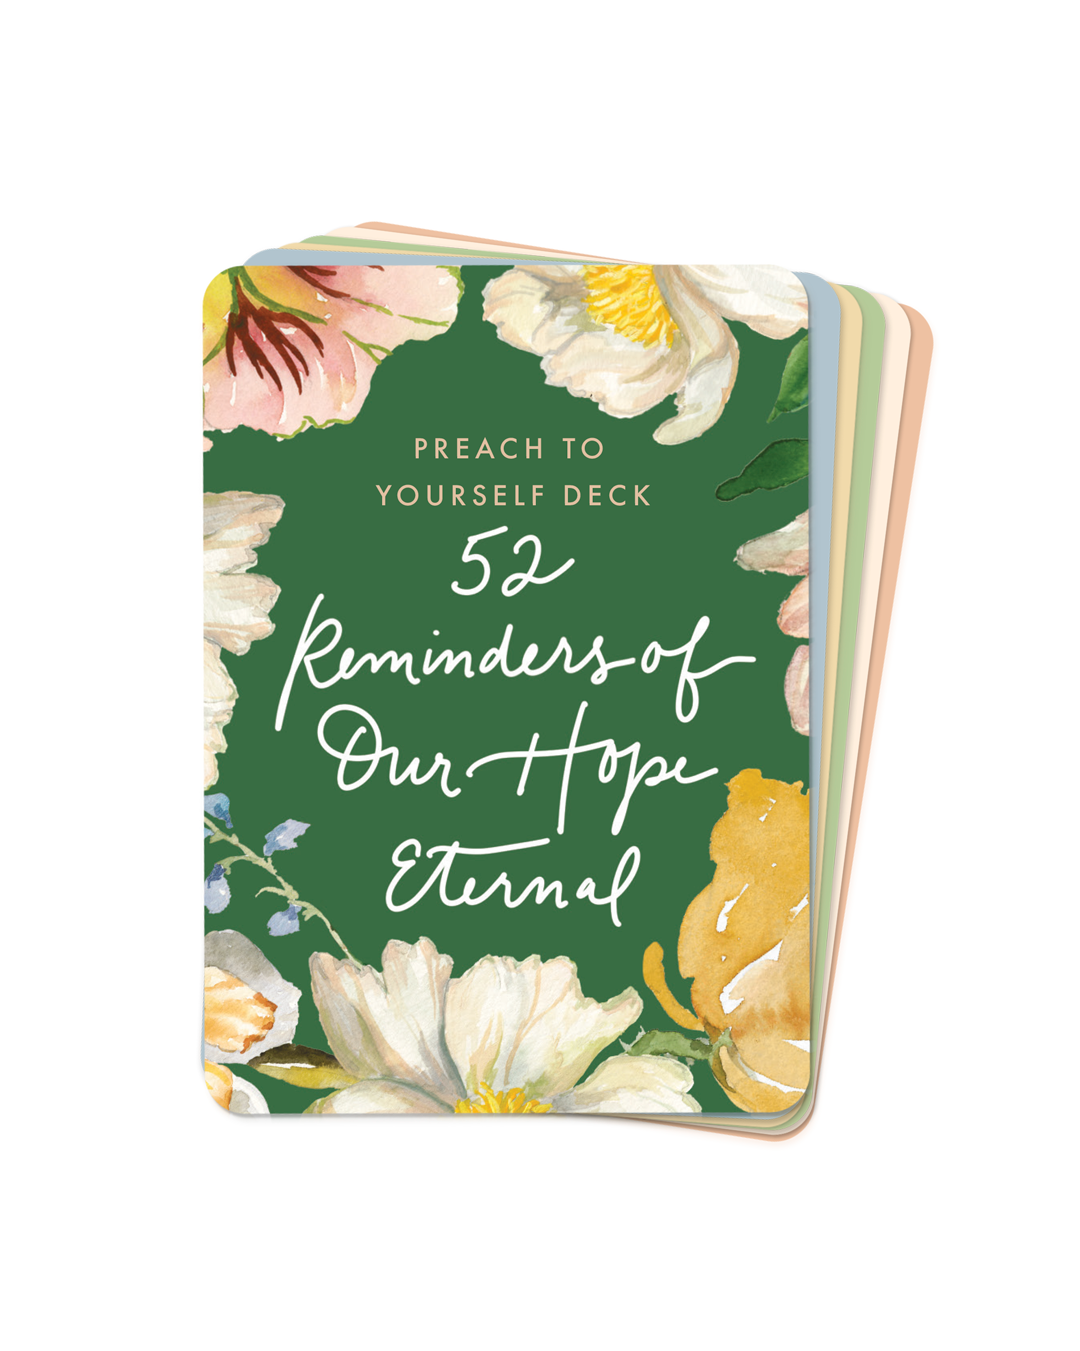 Preach to Yourself Deck: 52 Reminders of Our Hope Eternal